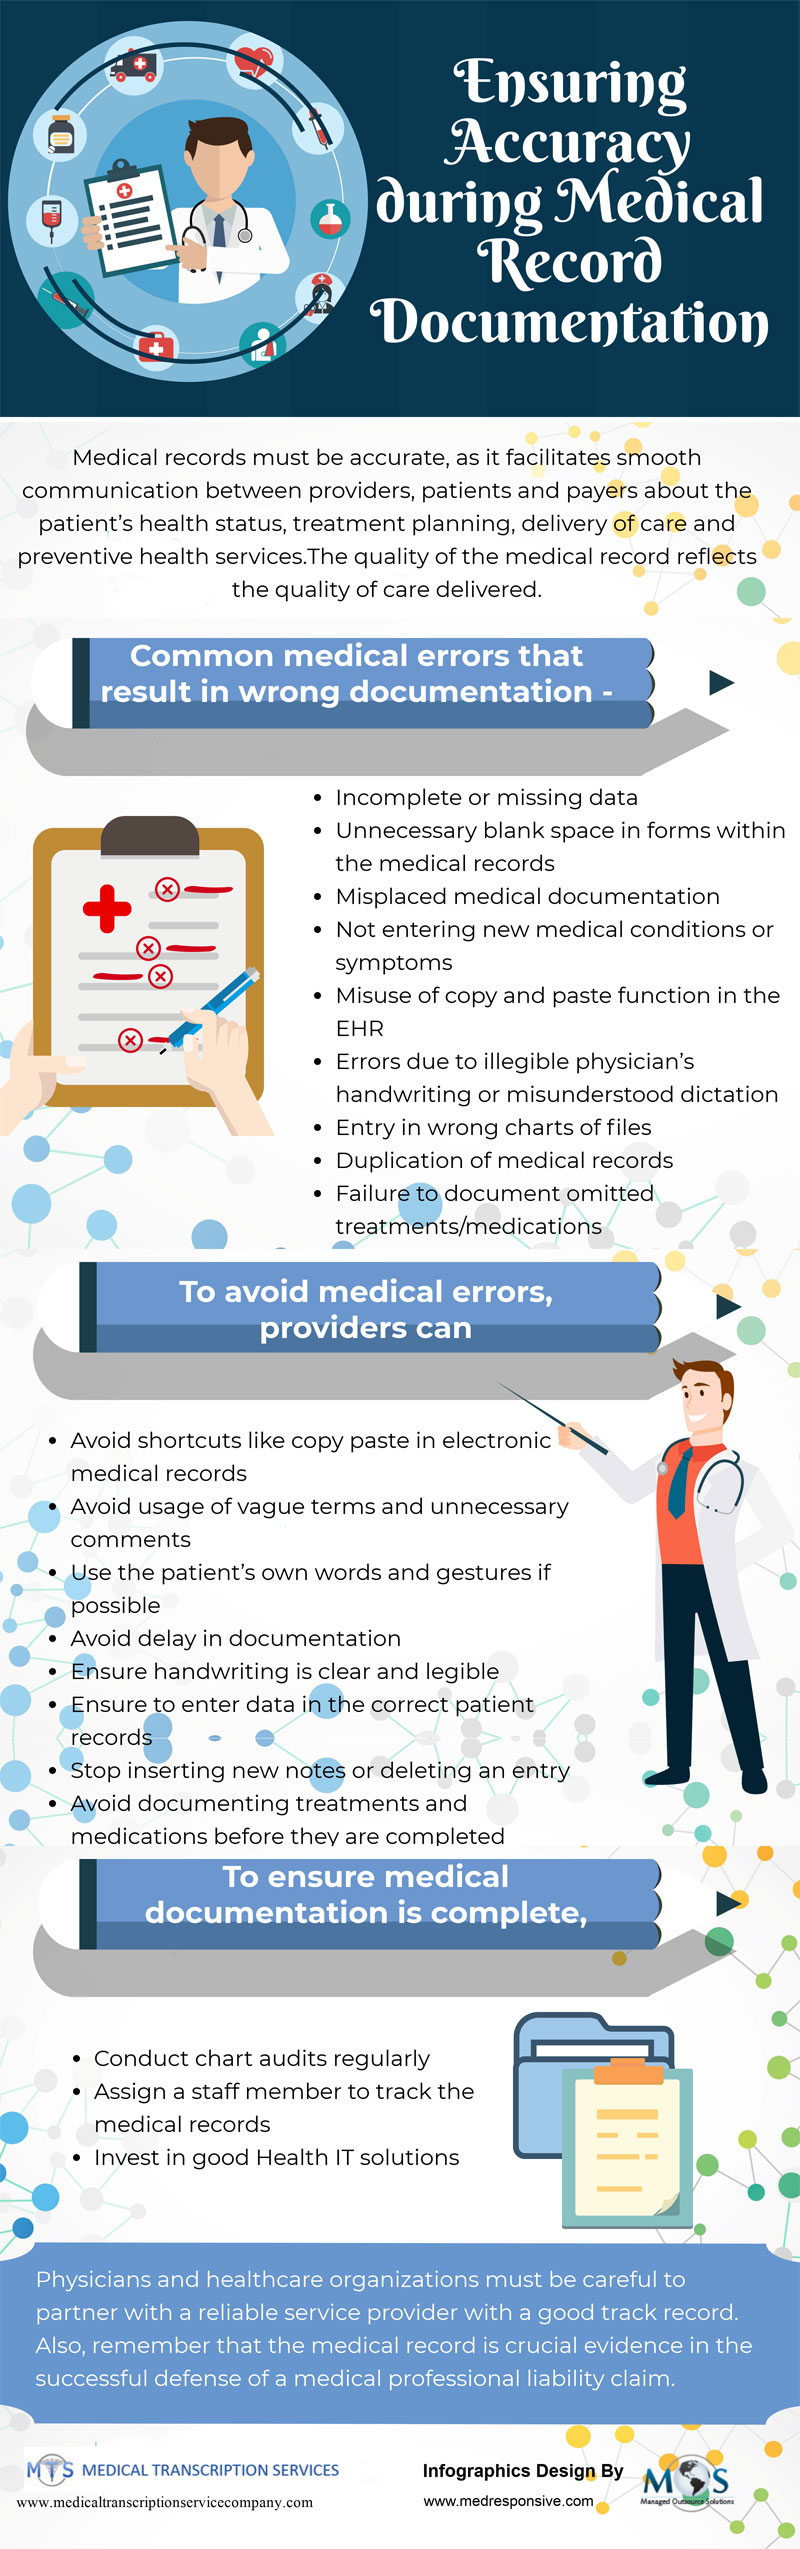 Ensuring Accuracy during Medical Record Documentation [Infographic]